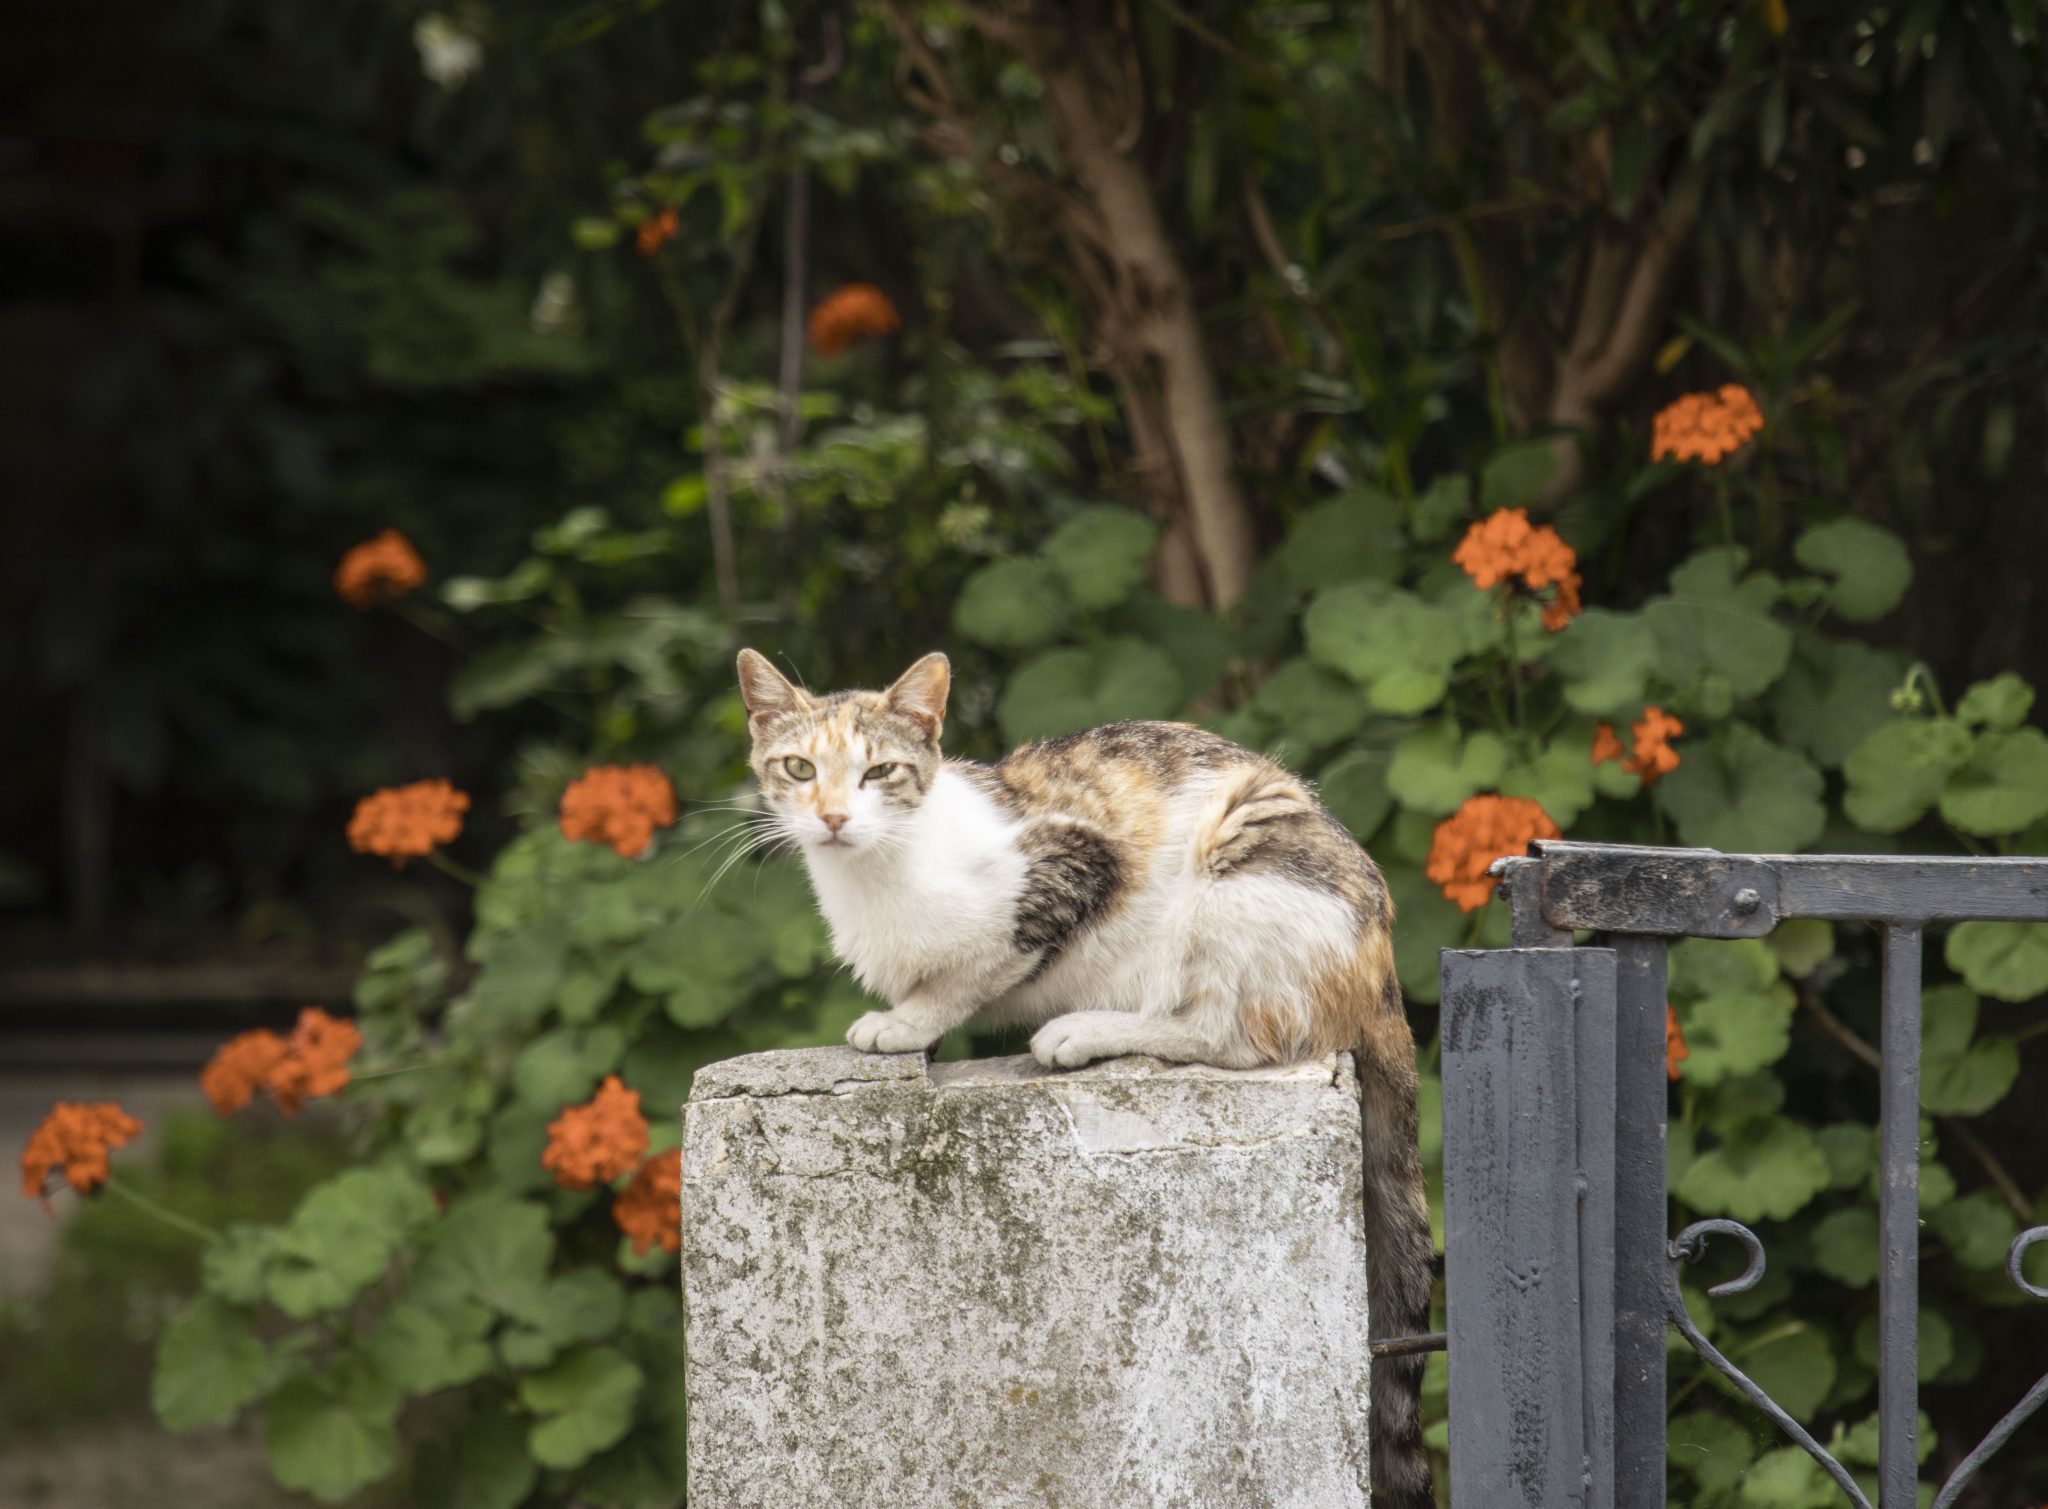 A stray cat in Istanbul, 02-06-2021. Image: unreguser/Xinhua News Agency/PA Images